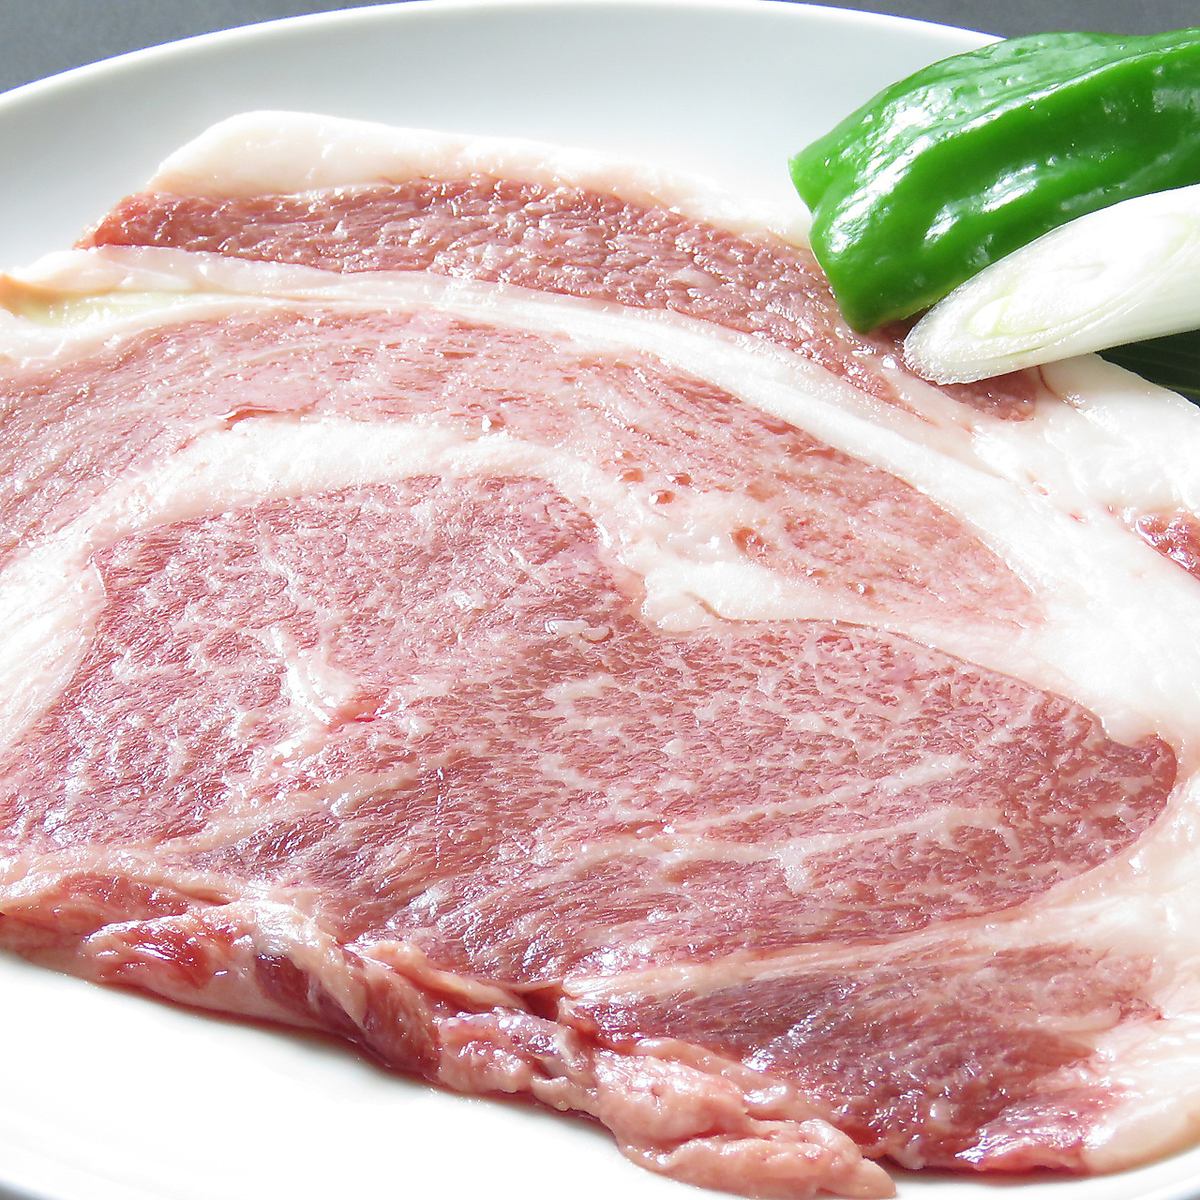 We have an all-you-can-eat A5 rank Wagyu beef course!